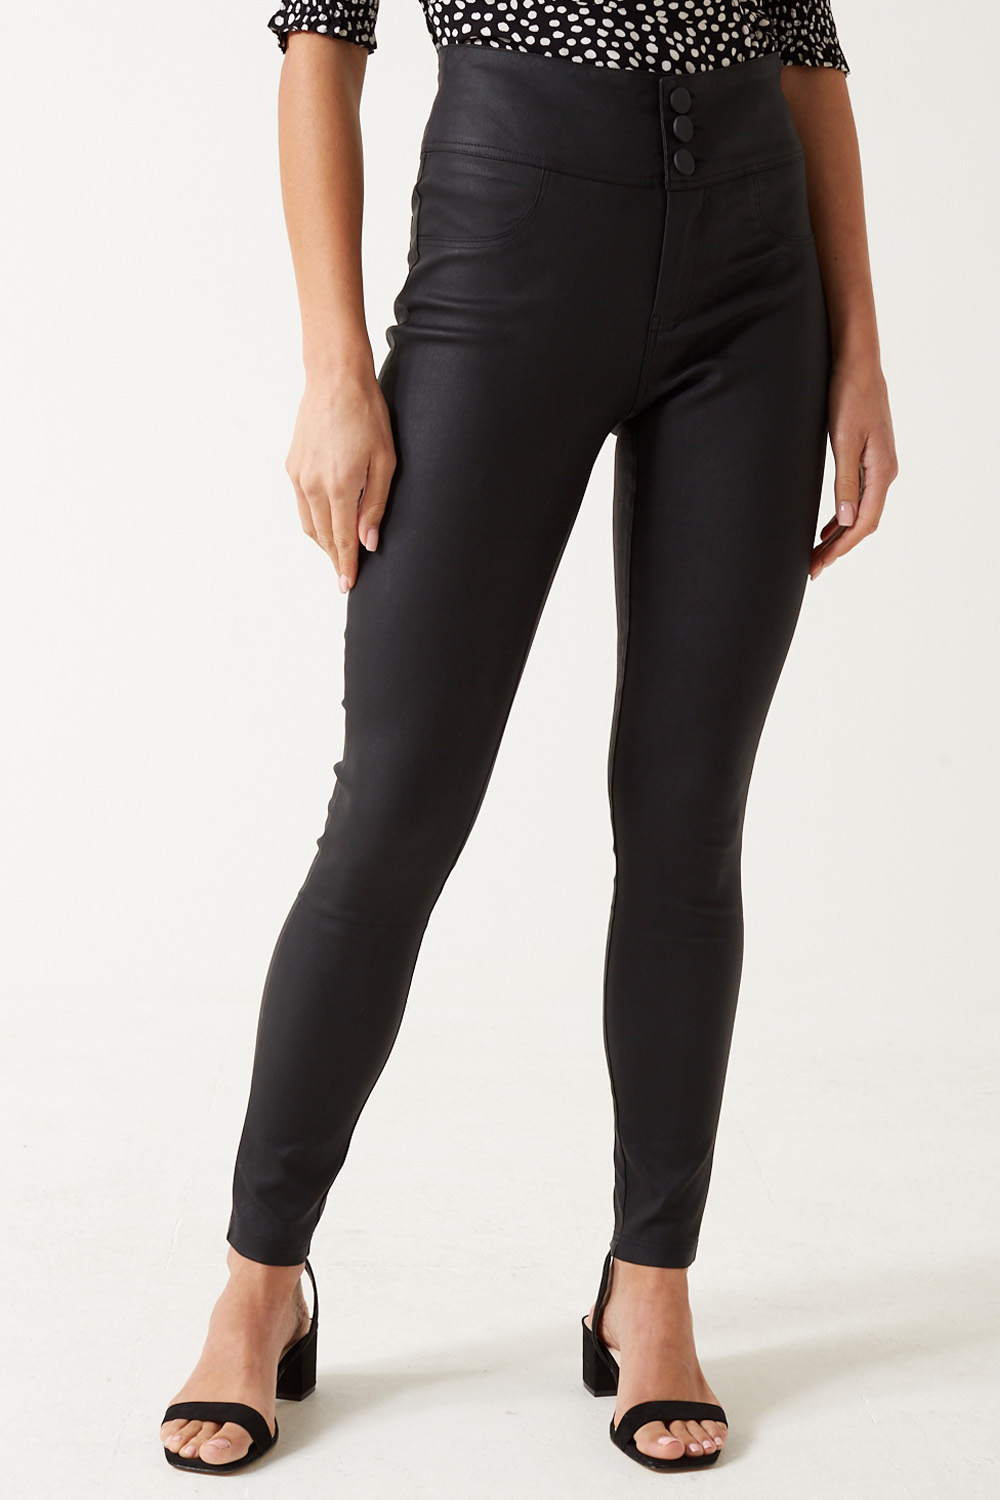 TOPSHOP Coated Faux Leather Leggings in Black